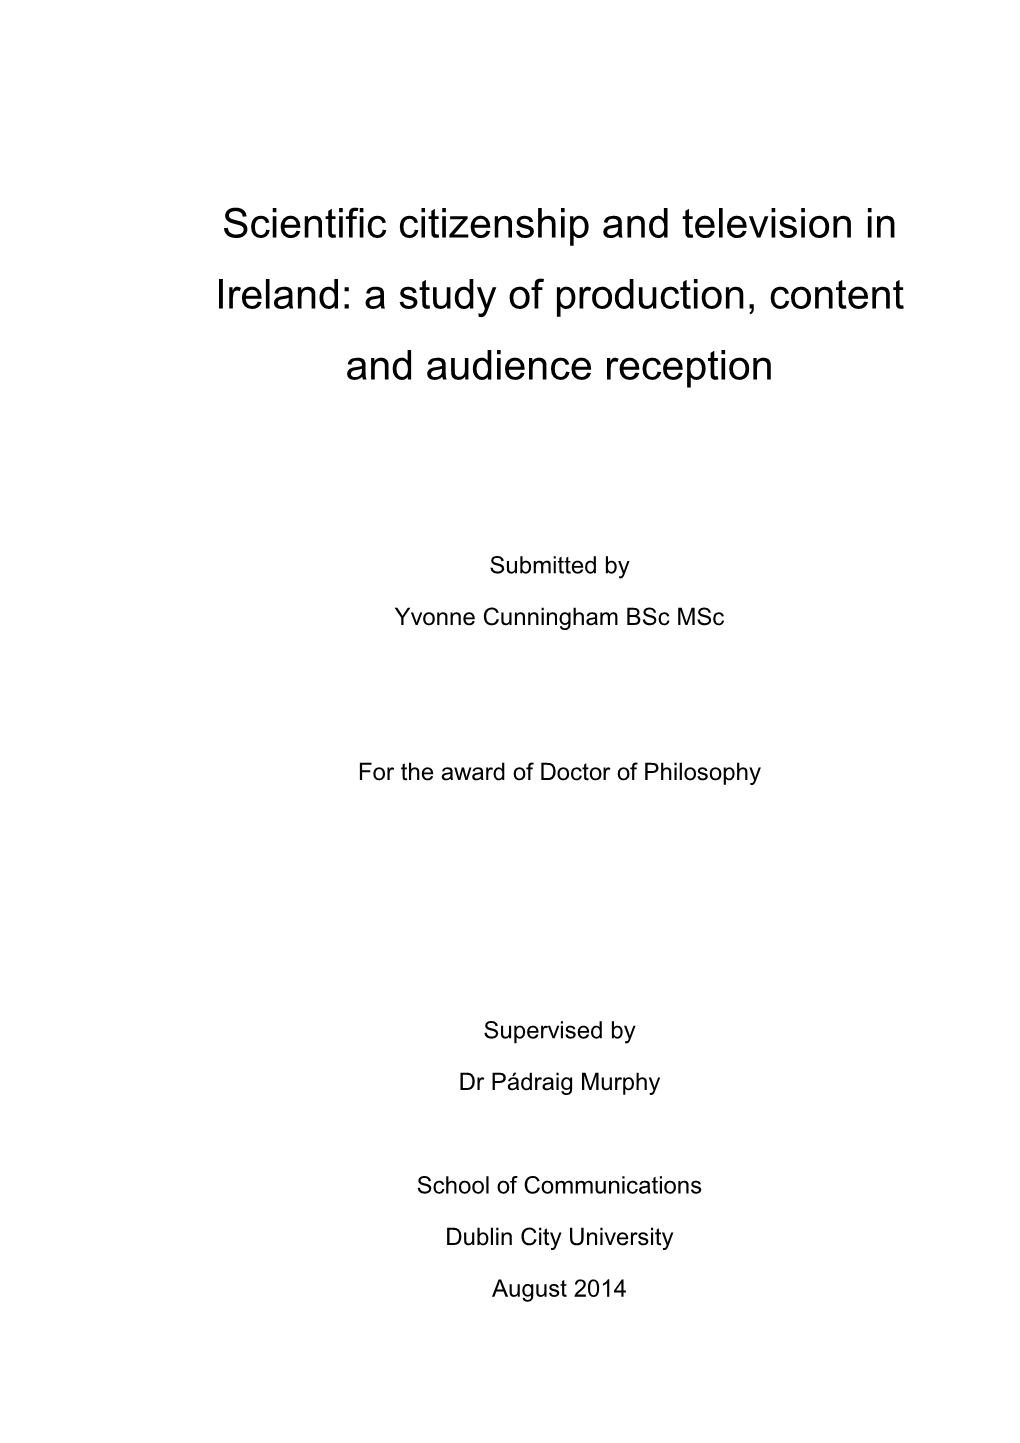 Scientific Citizenship and Television in Ireland: a Study of Production, Content and Audience Reception